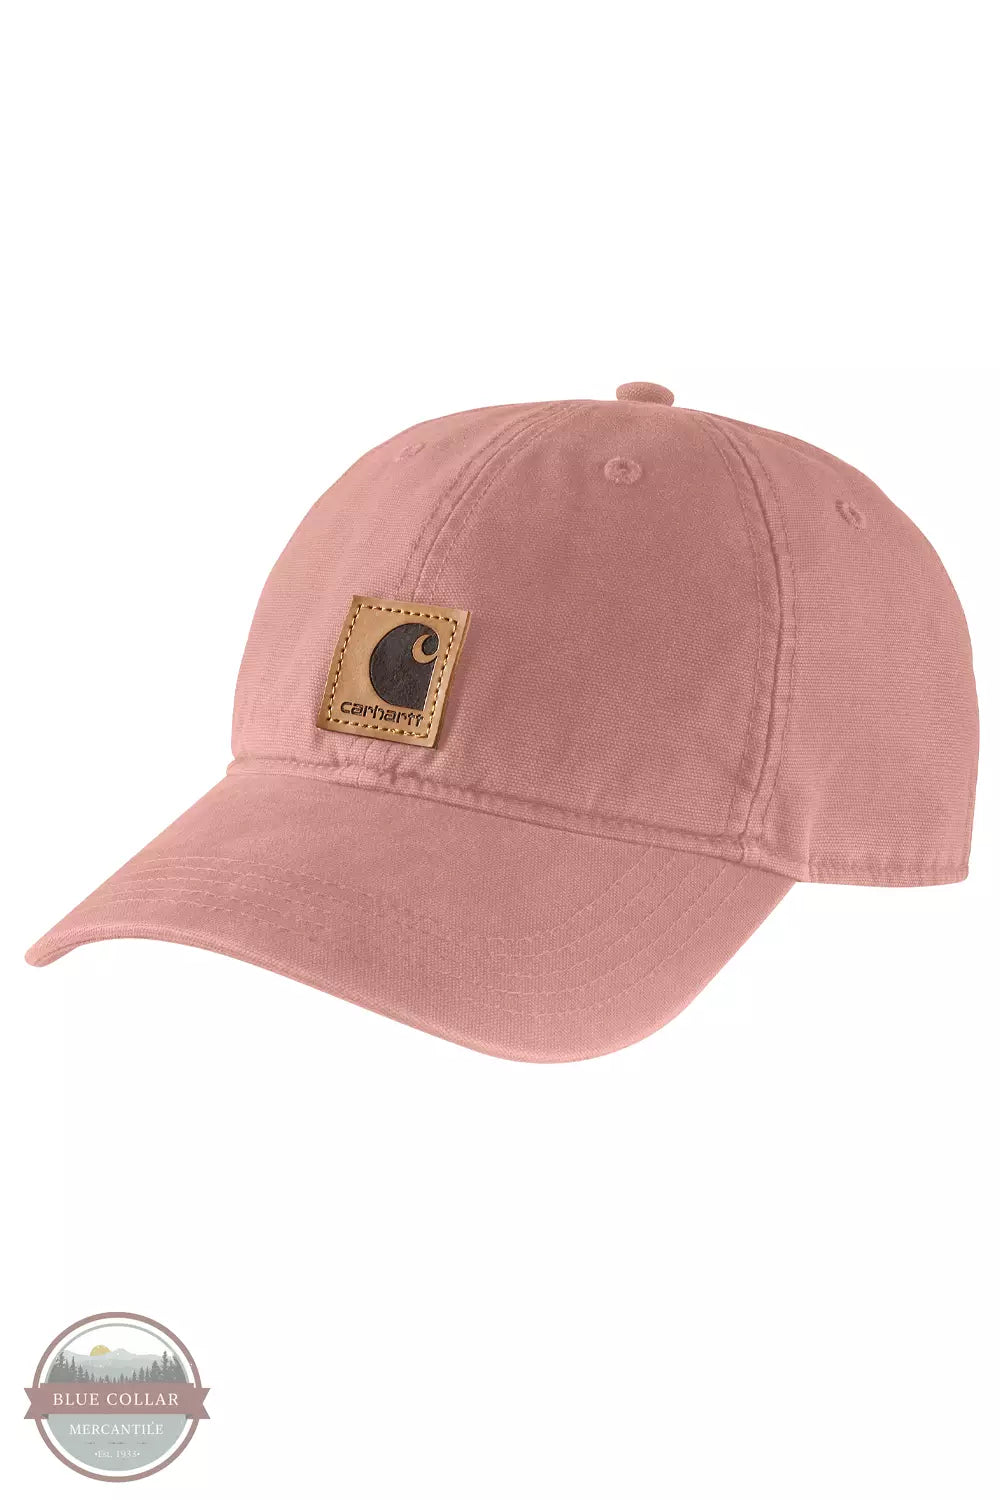 Carhartt 100289 Canvas Cap Cameo Brown Front View